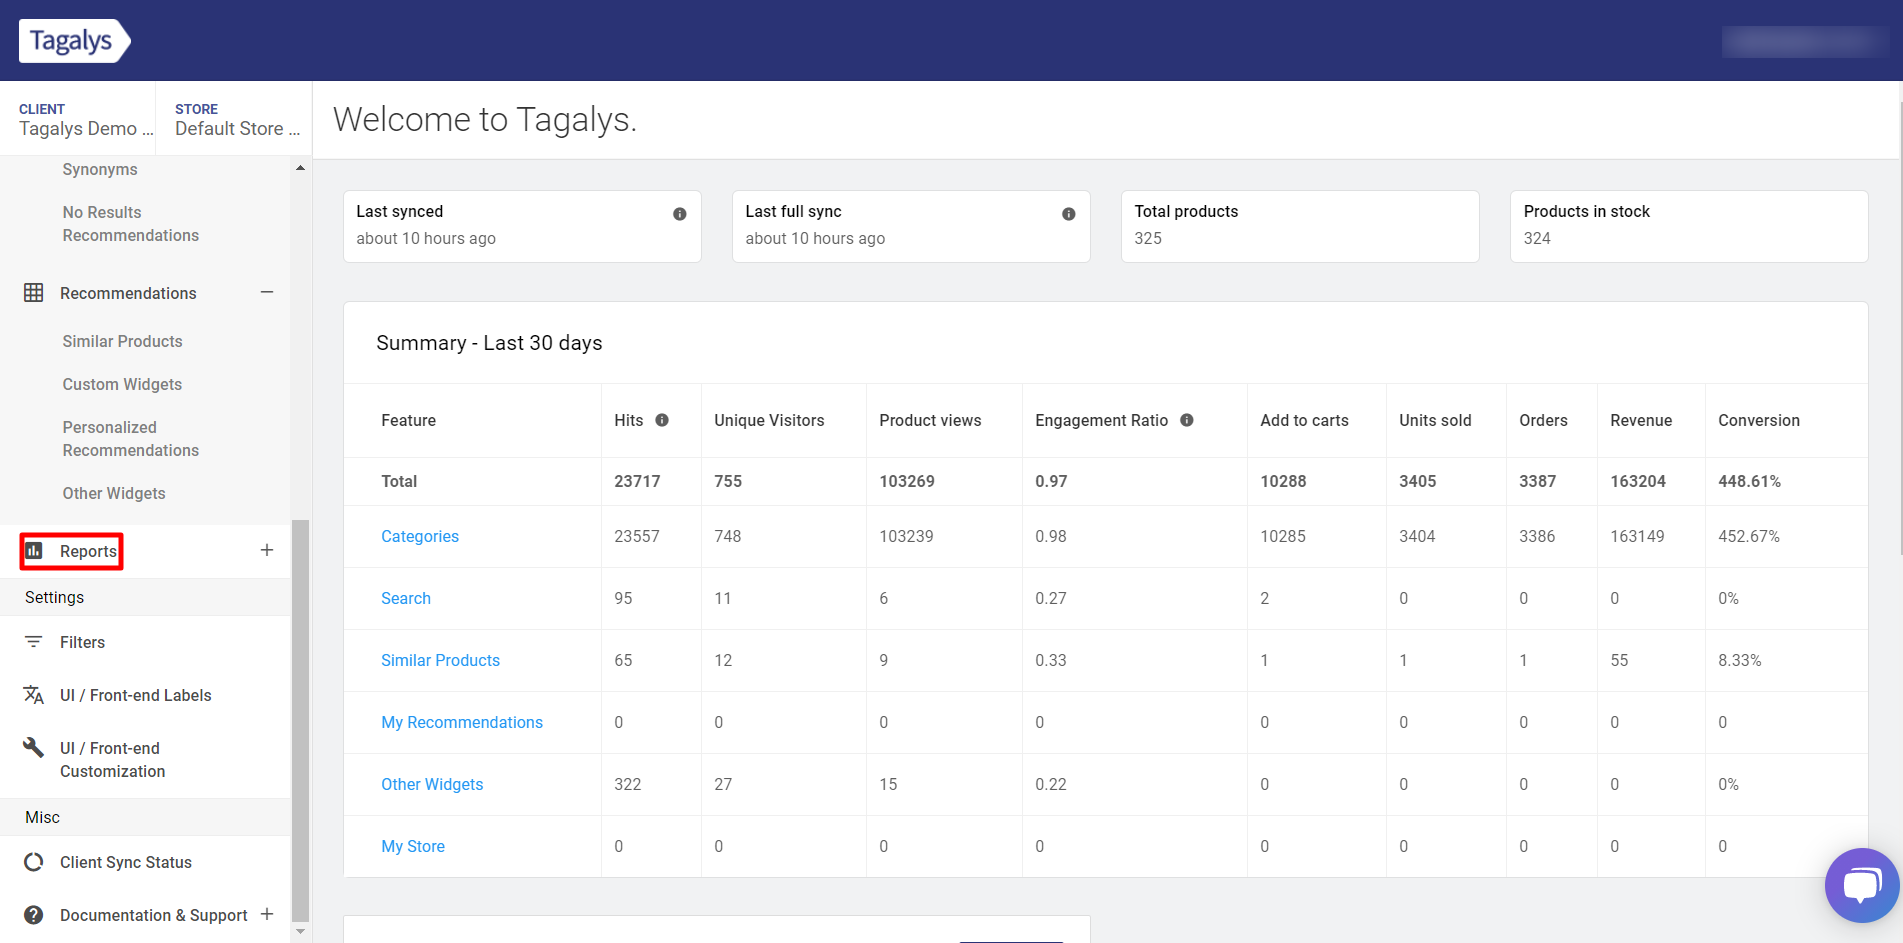 Download reports from Tagalys Dashboard